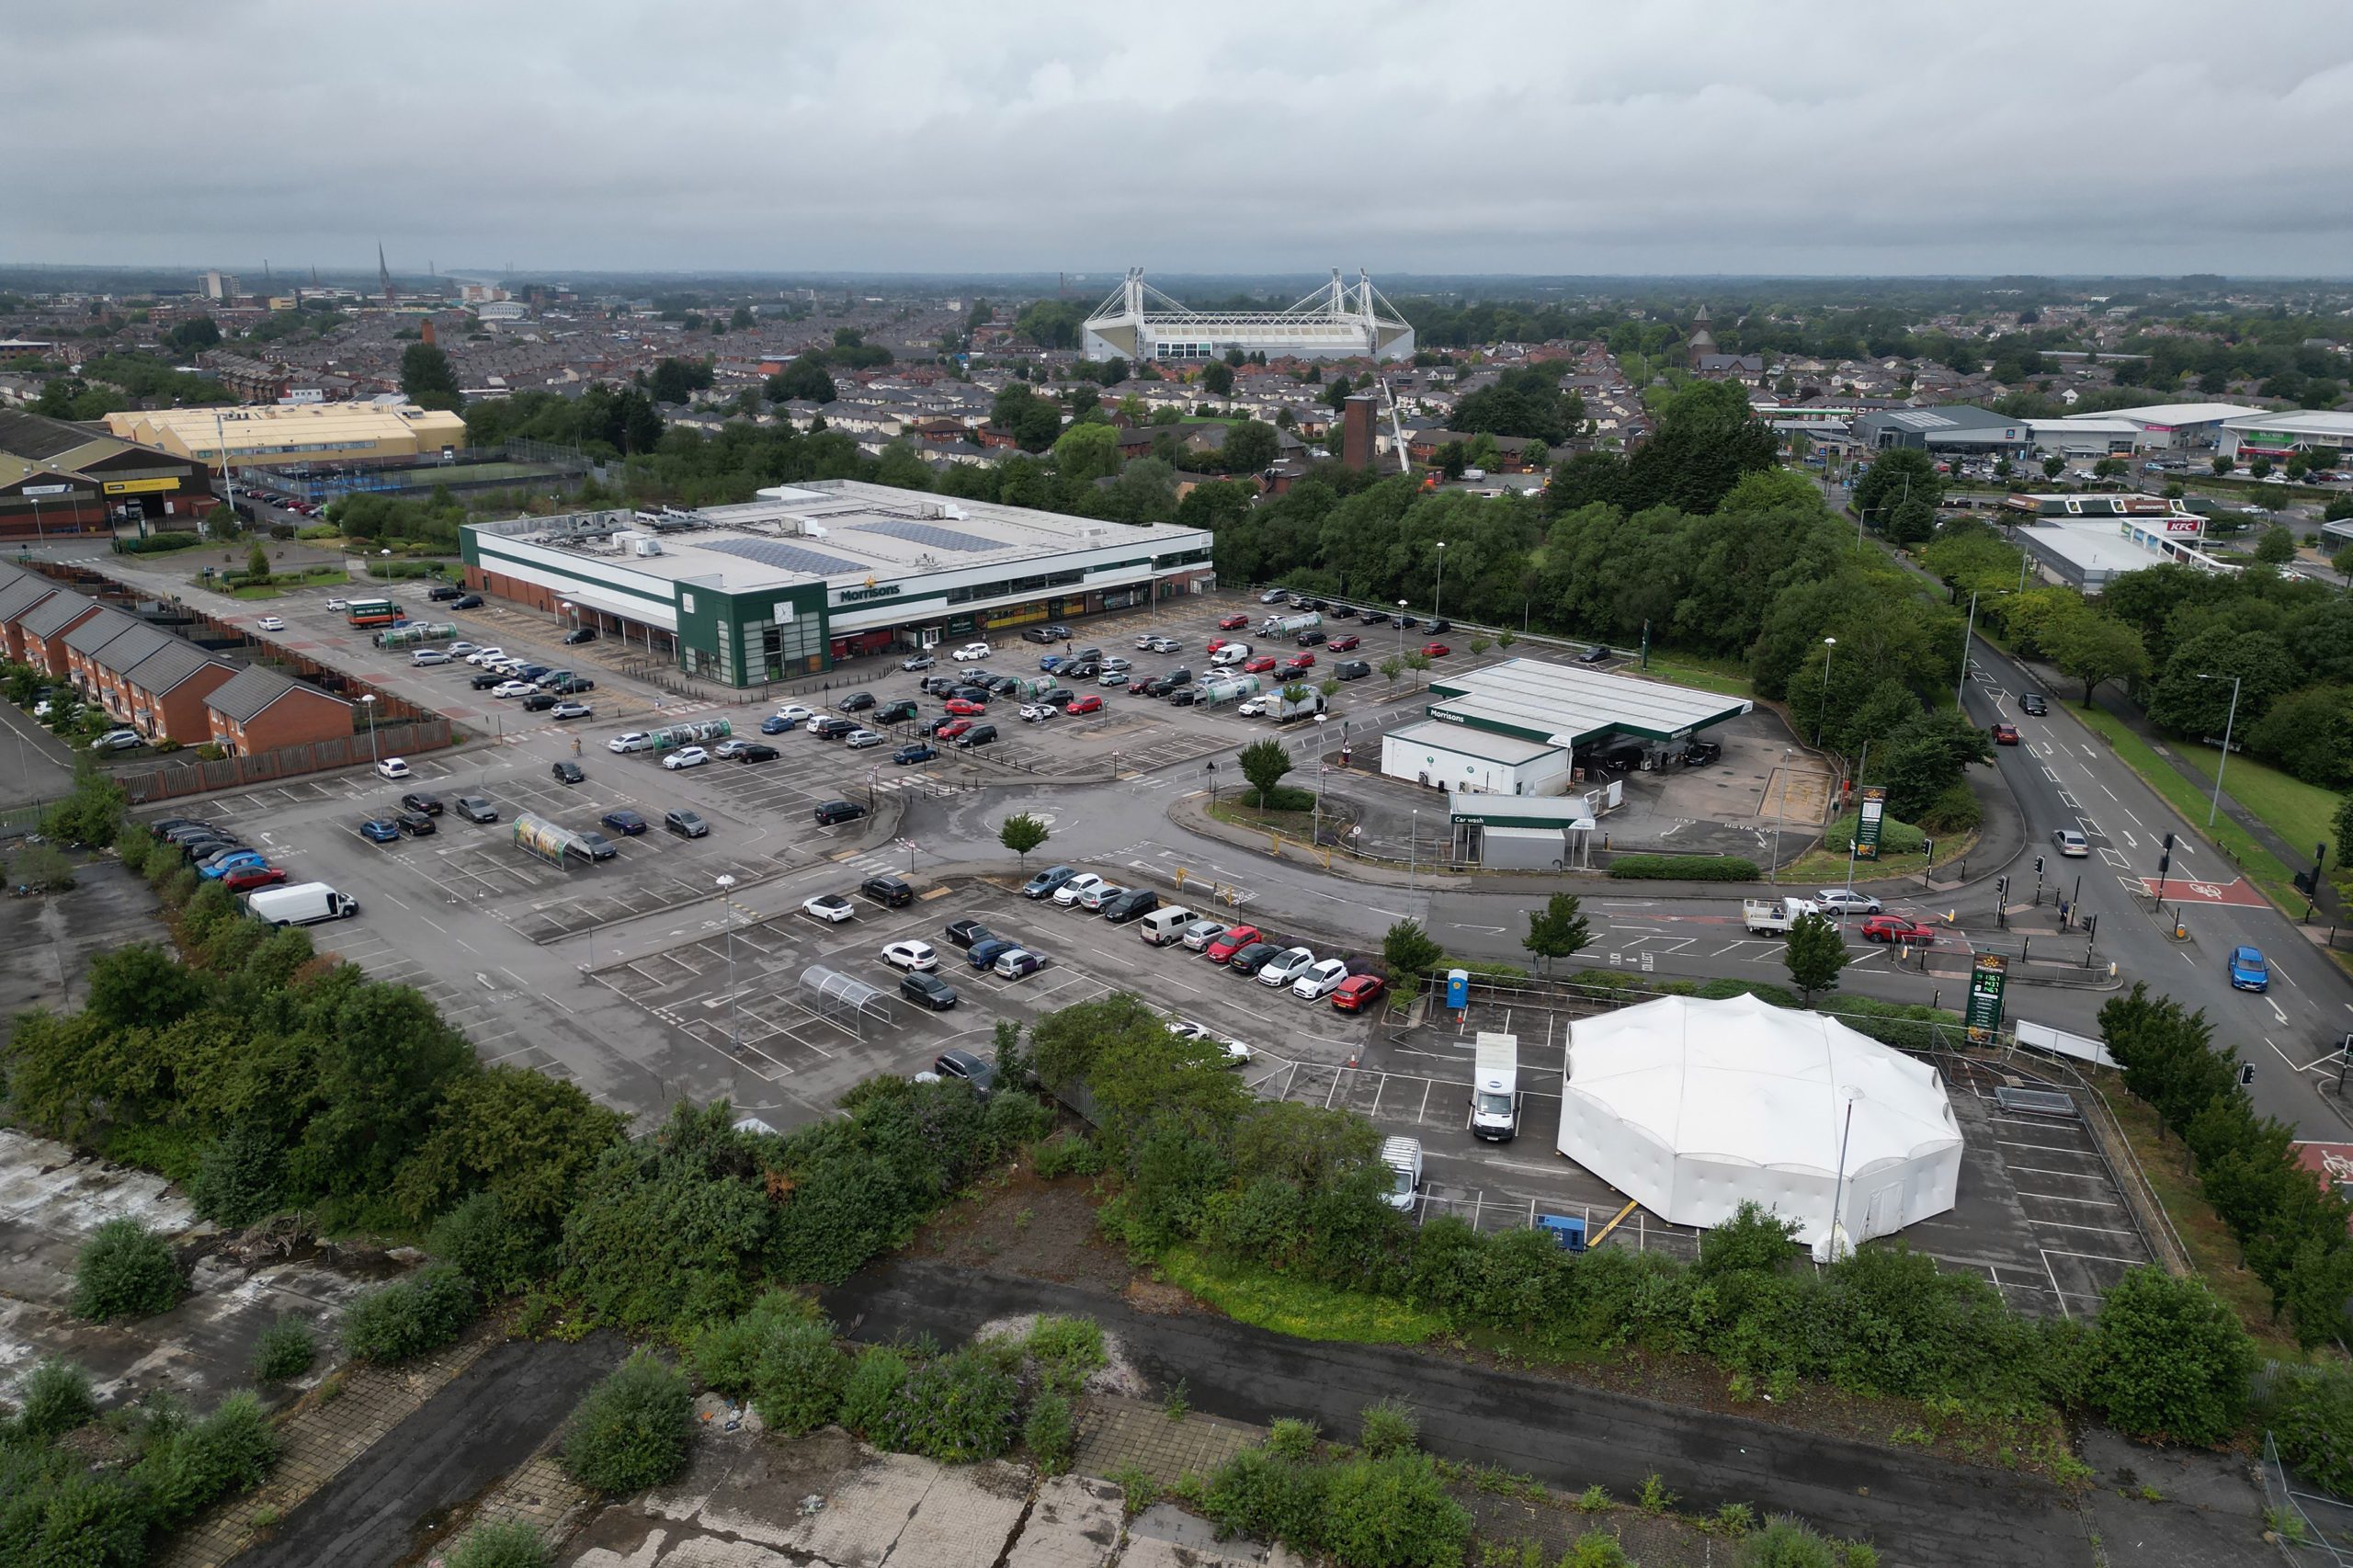 An aerial photograph of the MET installed in the Morrison's car park in Ribbleton.